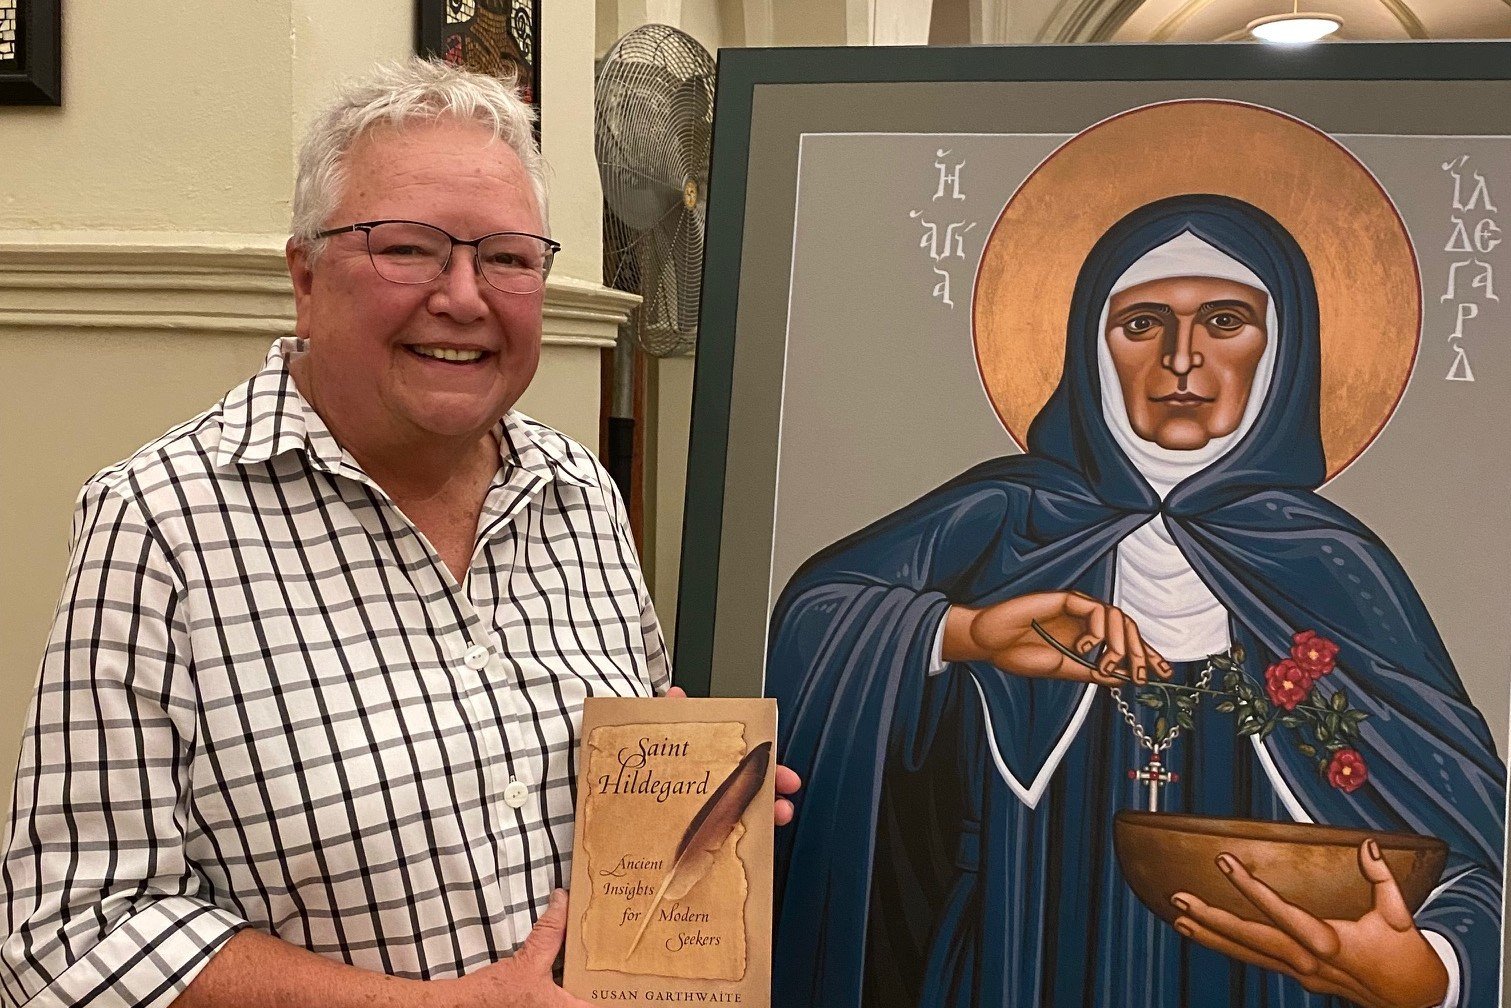 author Susan Garthwaite with icon of St. Hildegard and book